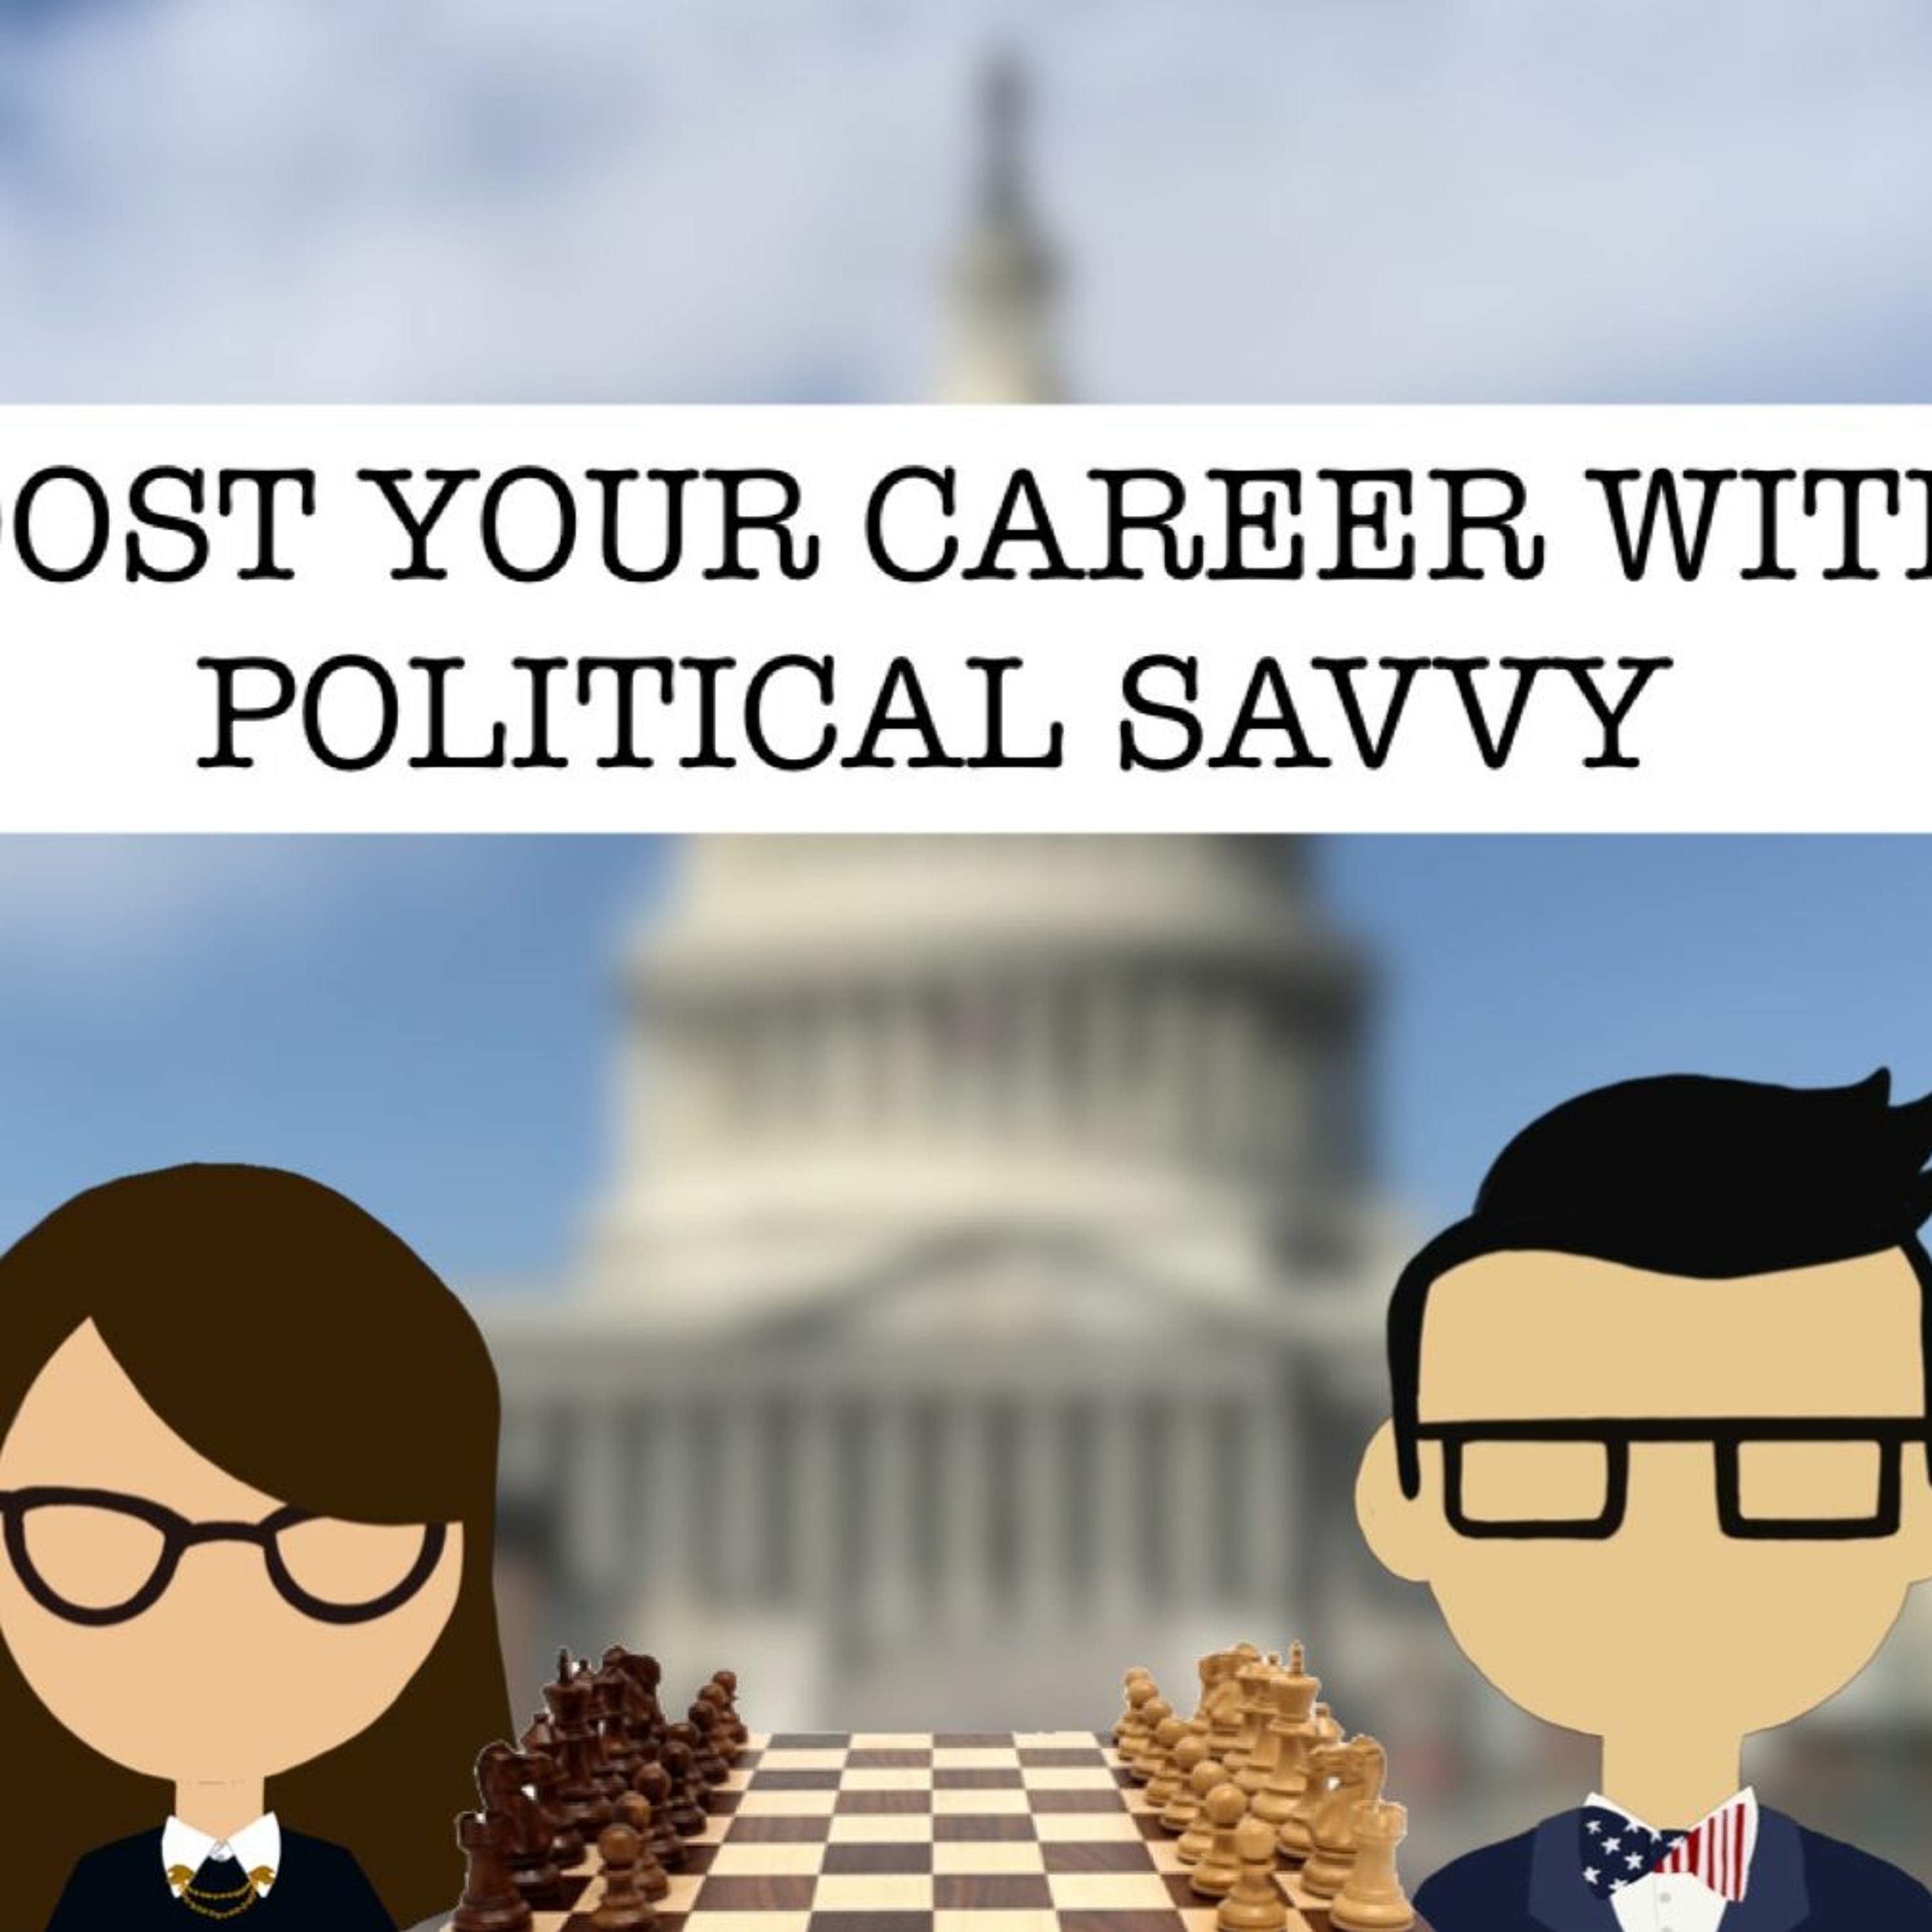 Boost your career with: Political Savvy